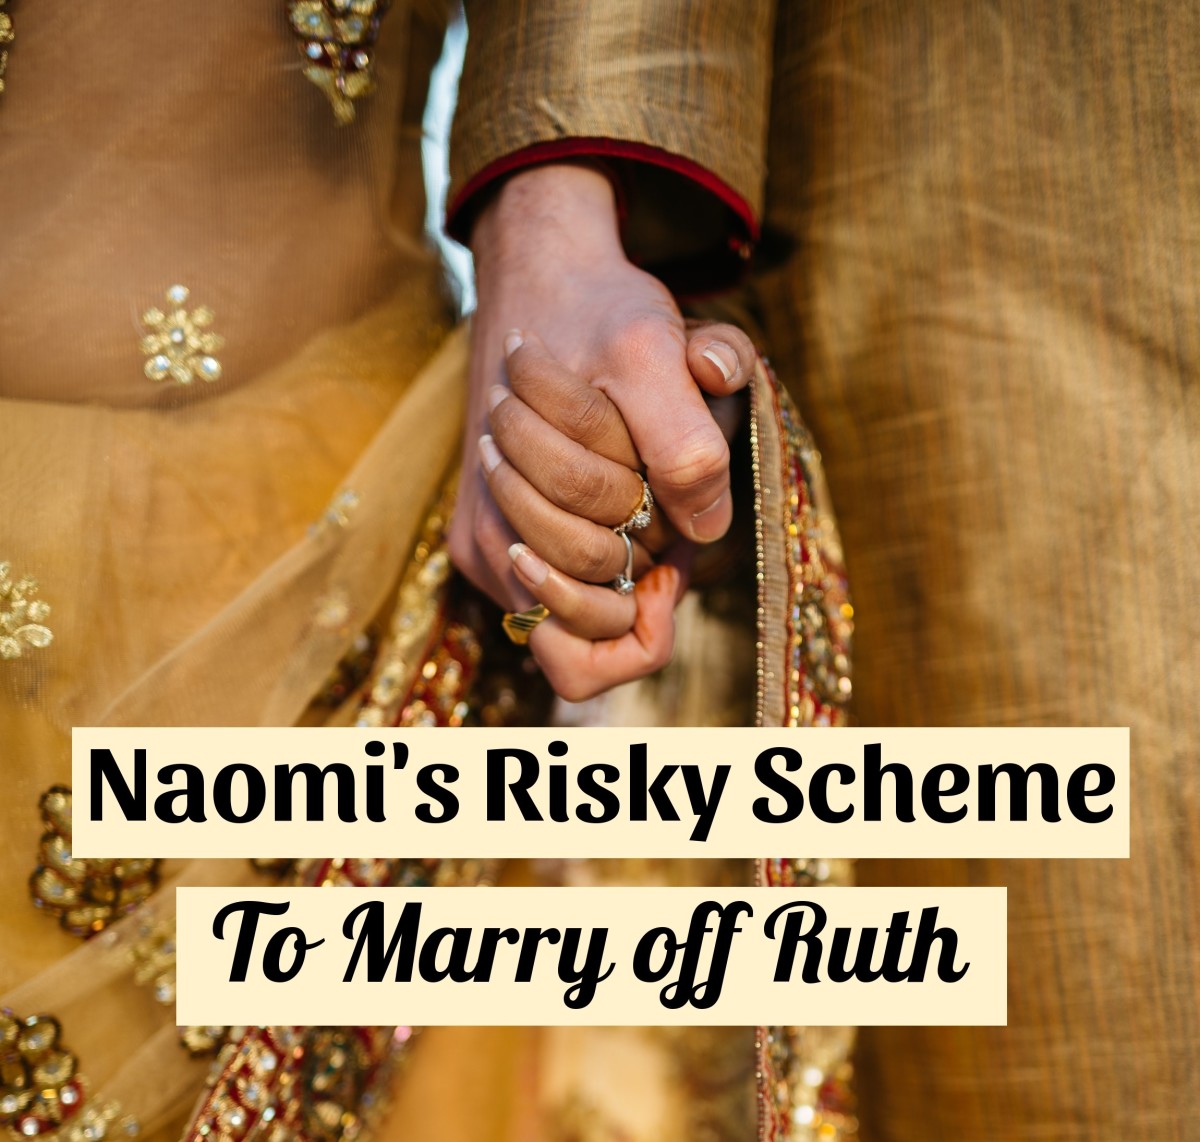 Naomi took the responsibility of finding a husband for Ruth.